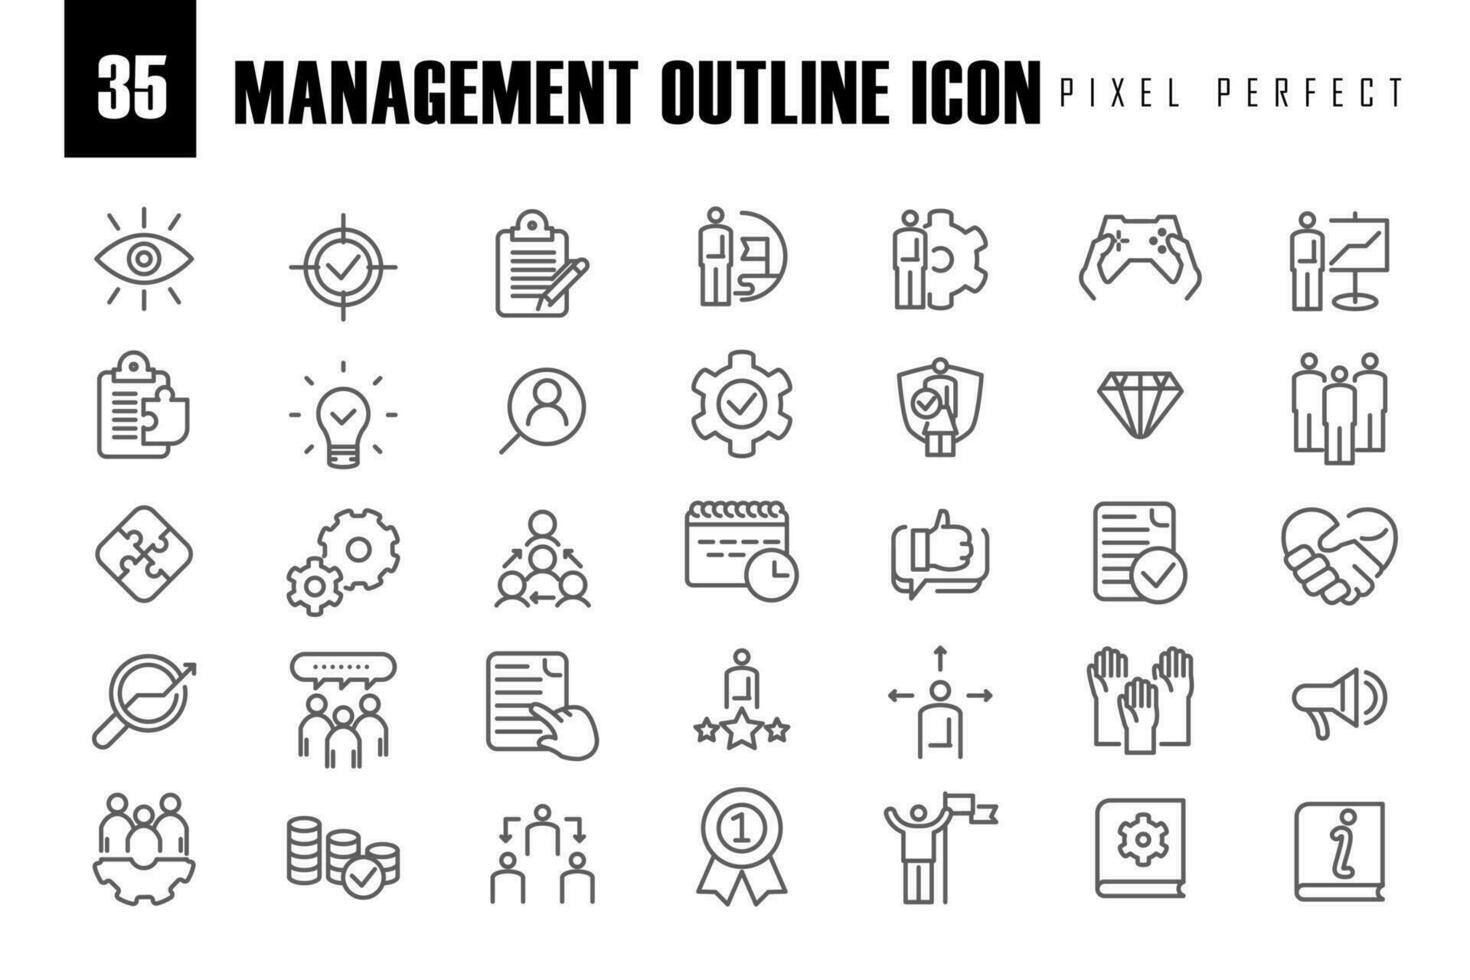 Business Management Outline pixel perfect Icon Collection. designed for mobile and web. Simple web icons set vector